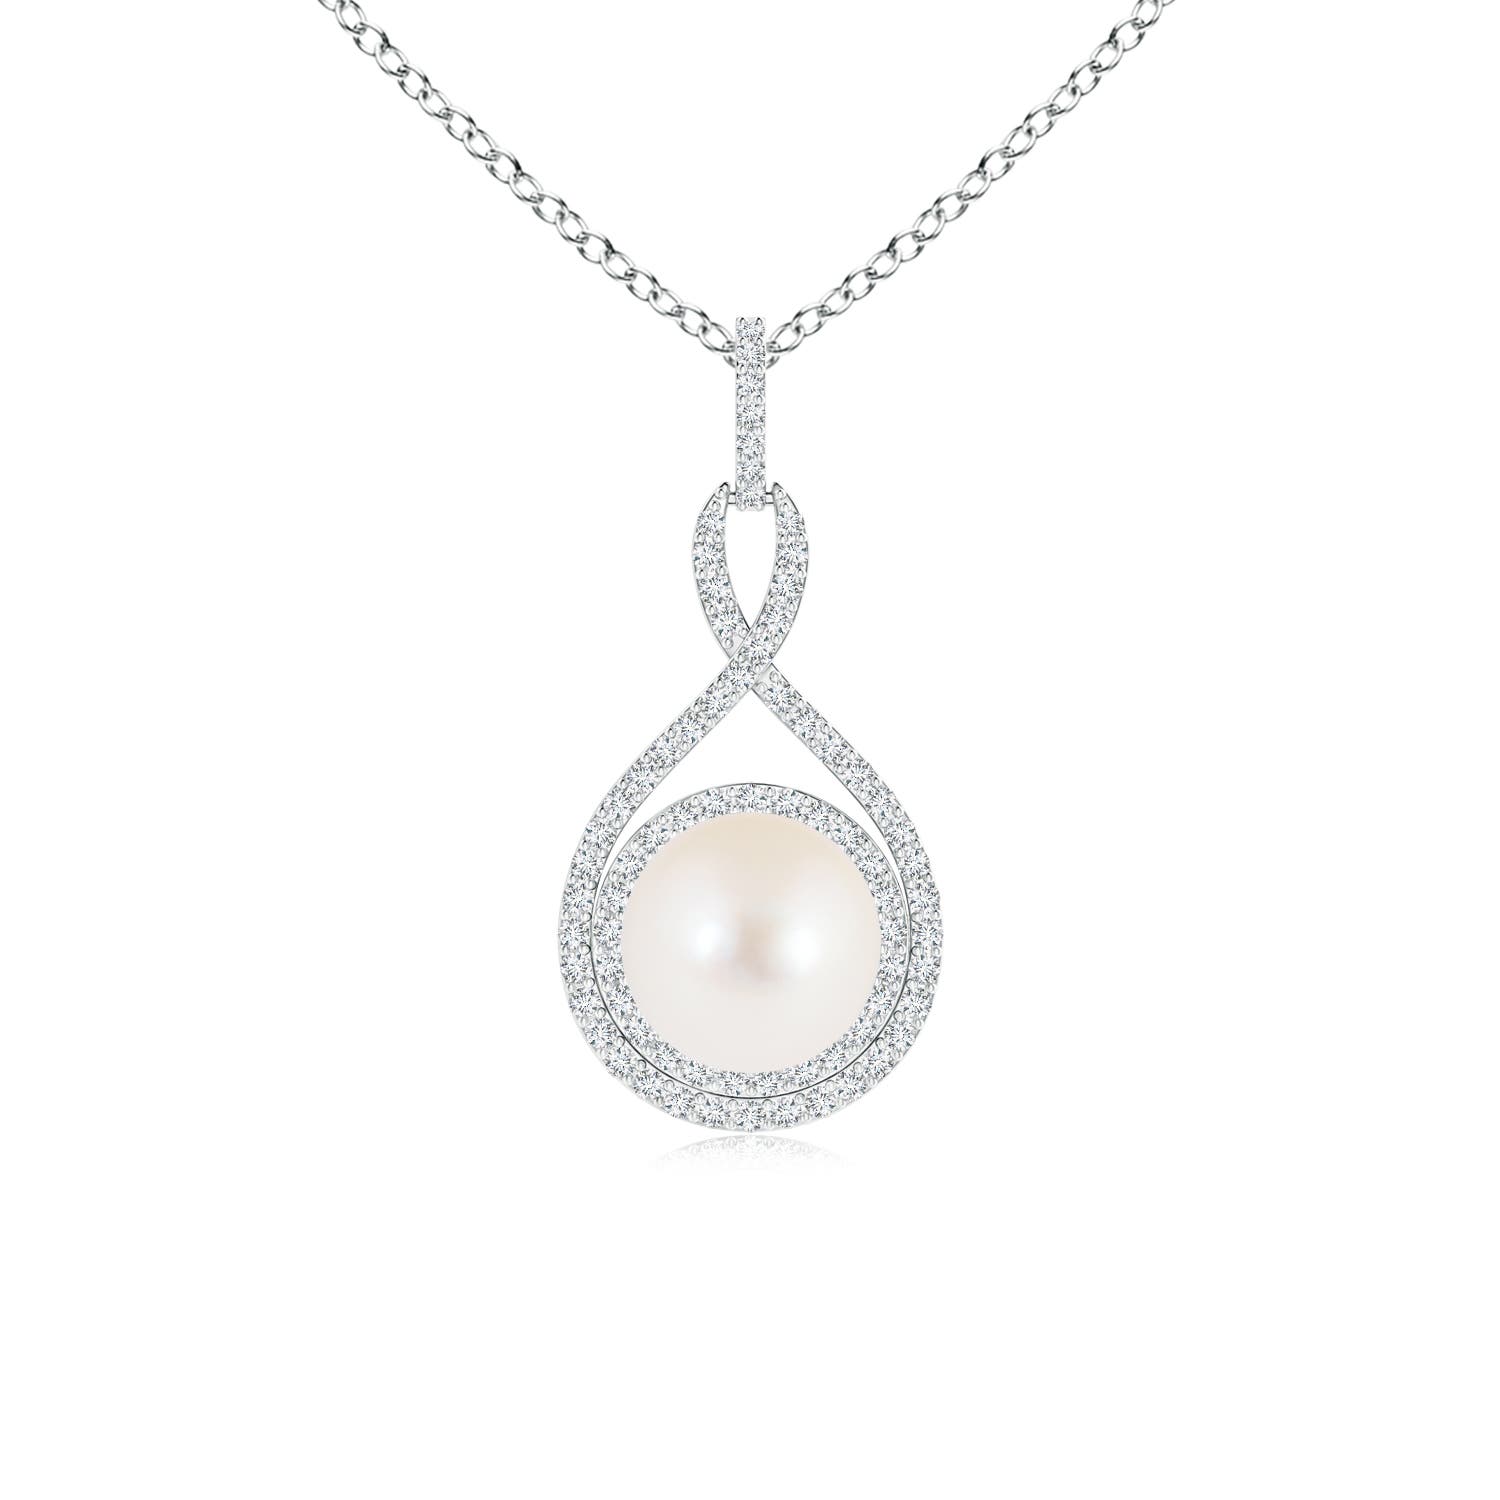 AAA - Freshwater Cultured Pearl / 4.08 CT / 14 KT White Gold